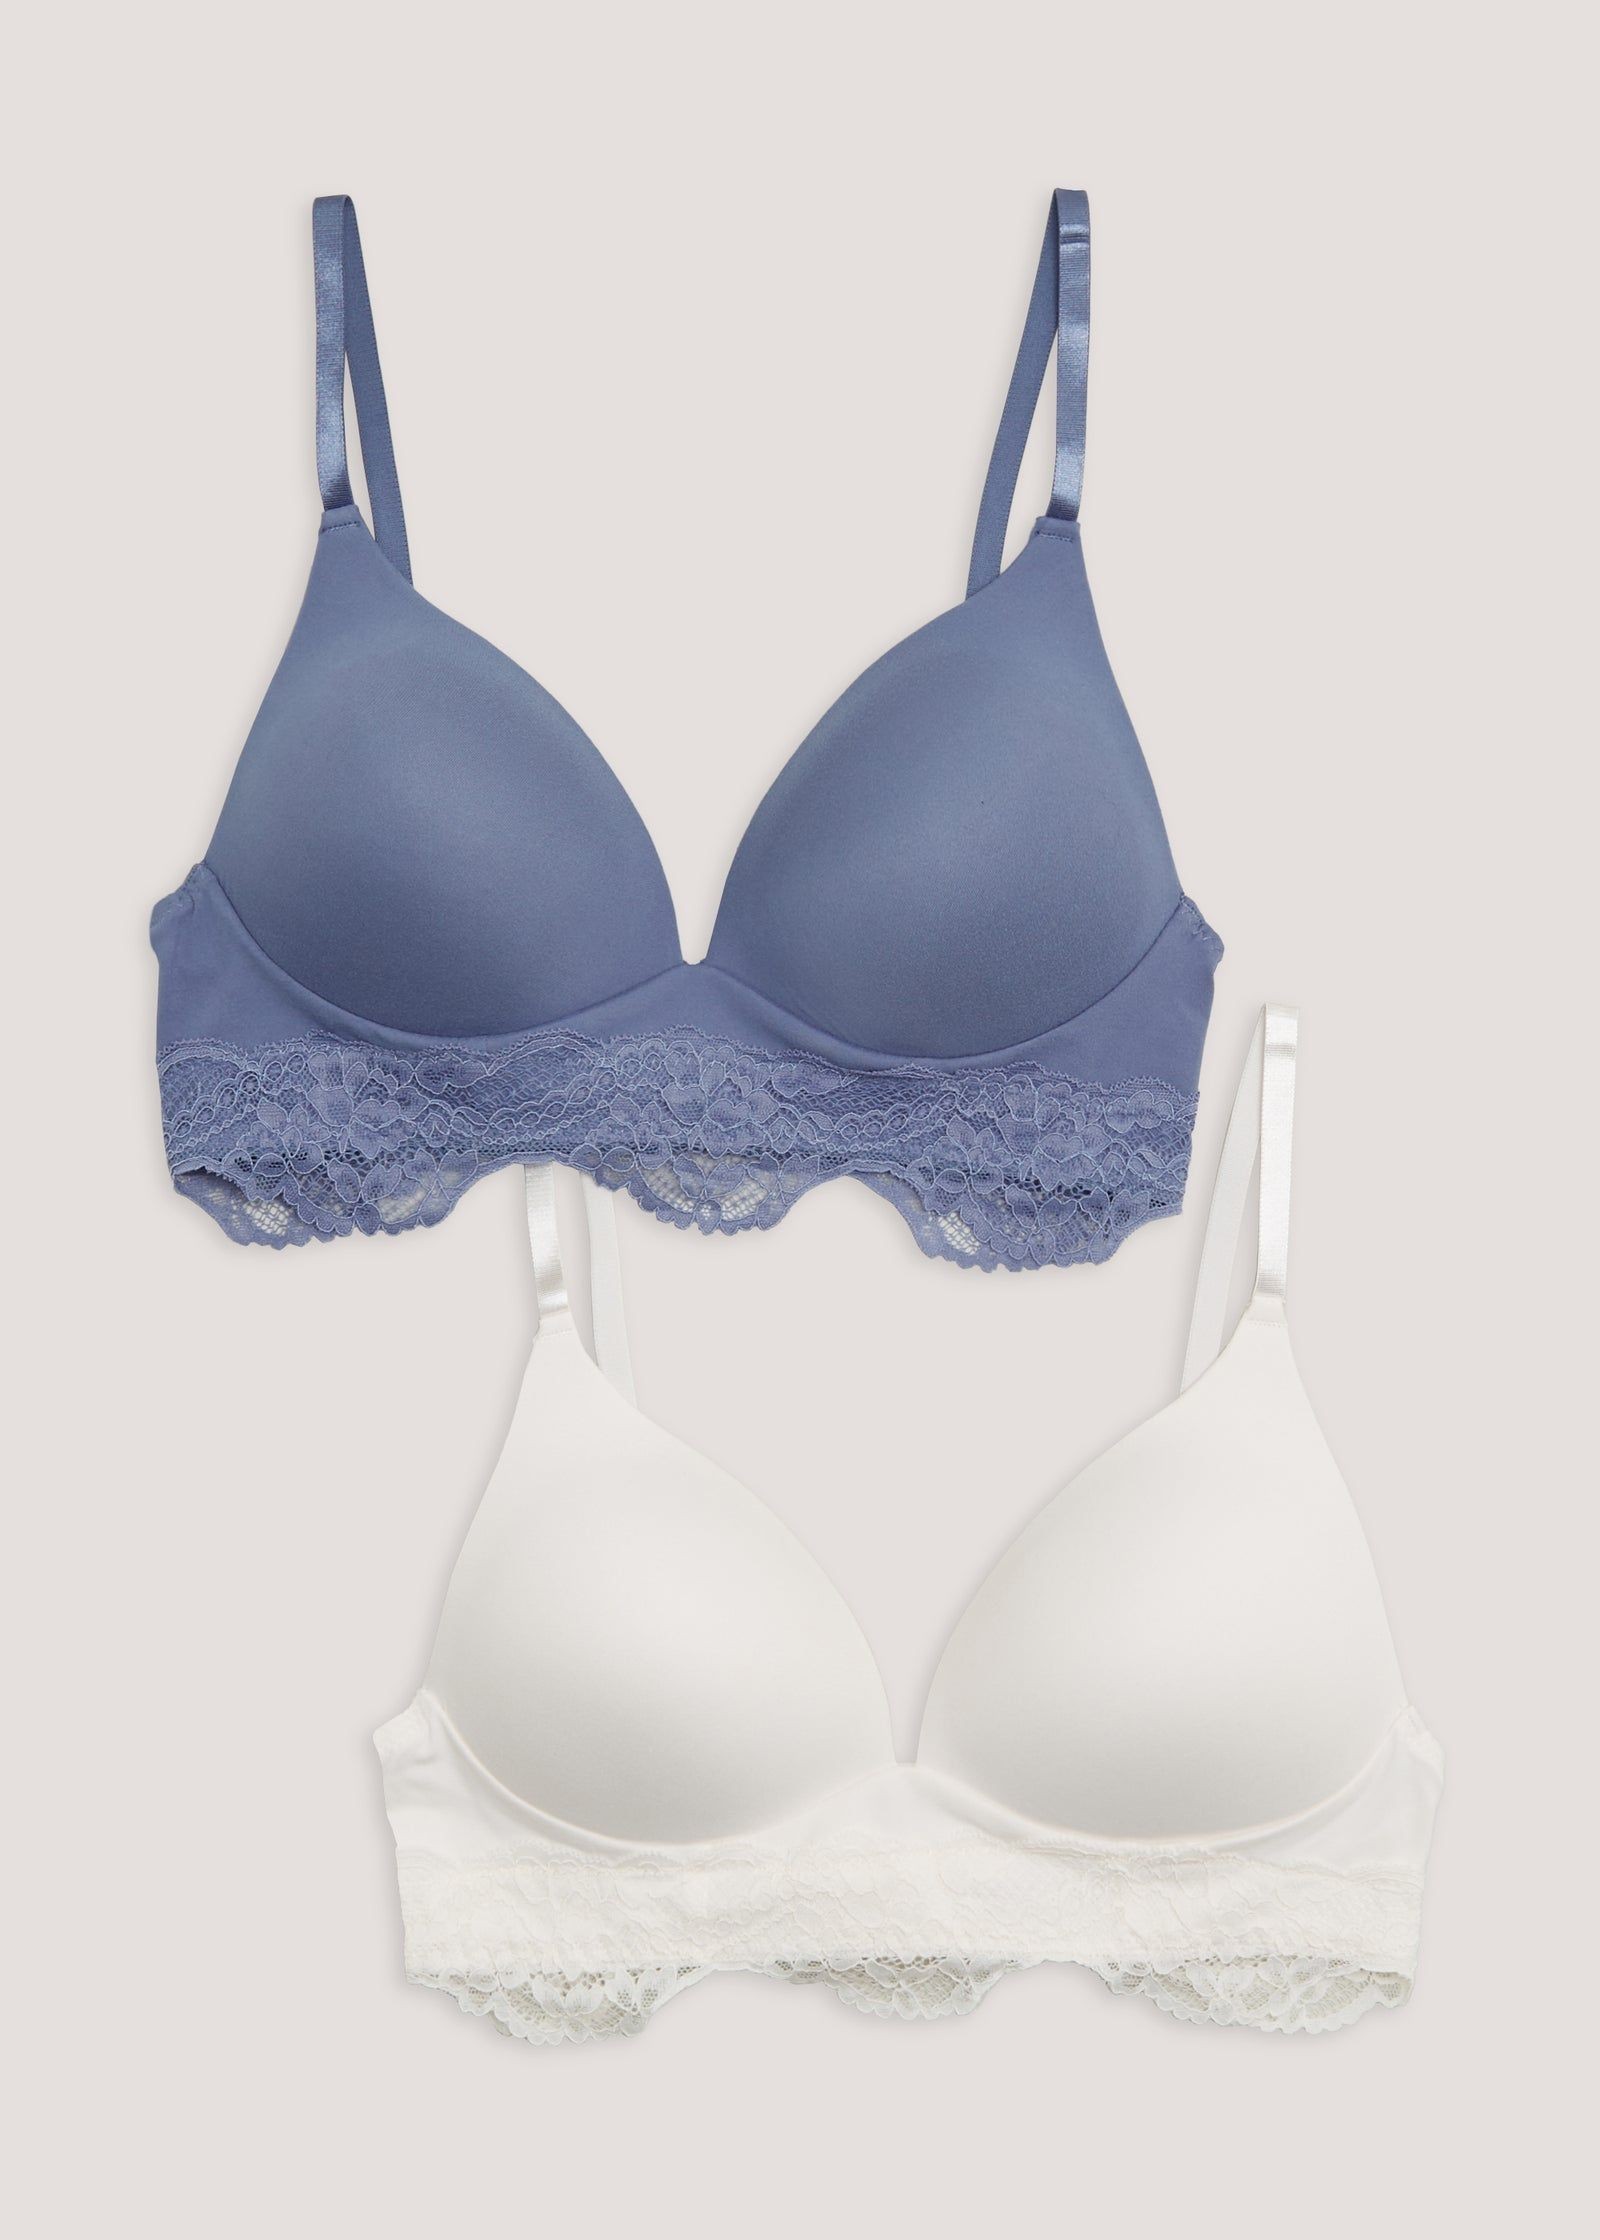 Shop Padded Non-Wired Plunge Bra with Adjustable Straps and Lace Detail  Online